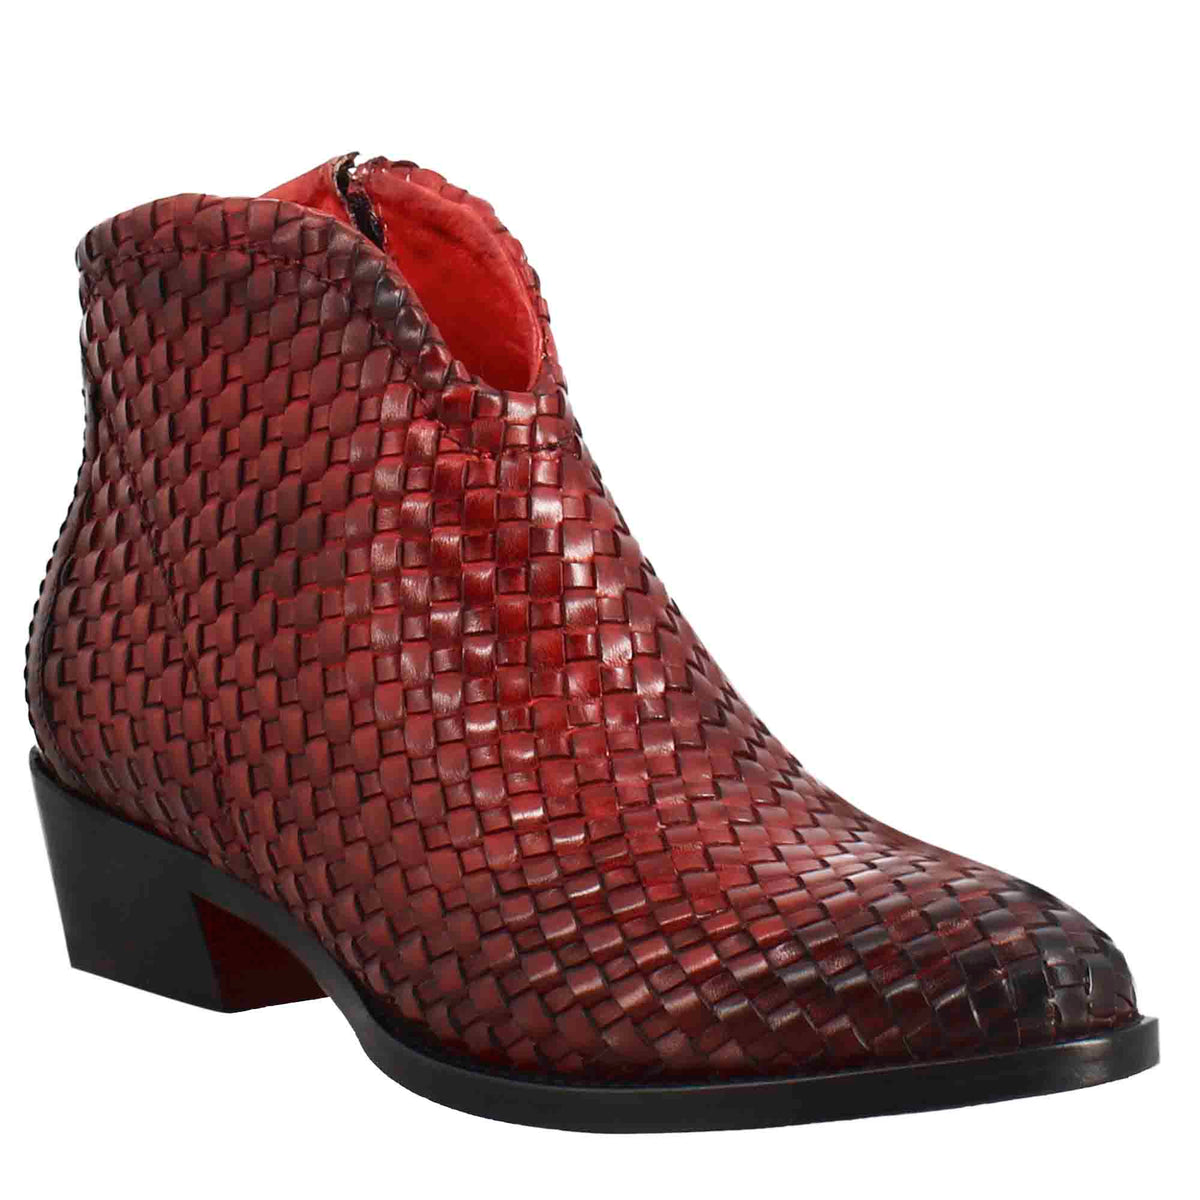 Women's ankle boot in woven leather with red medium heel